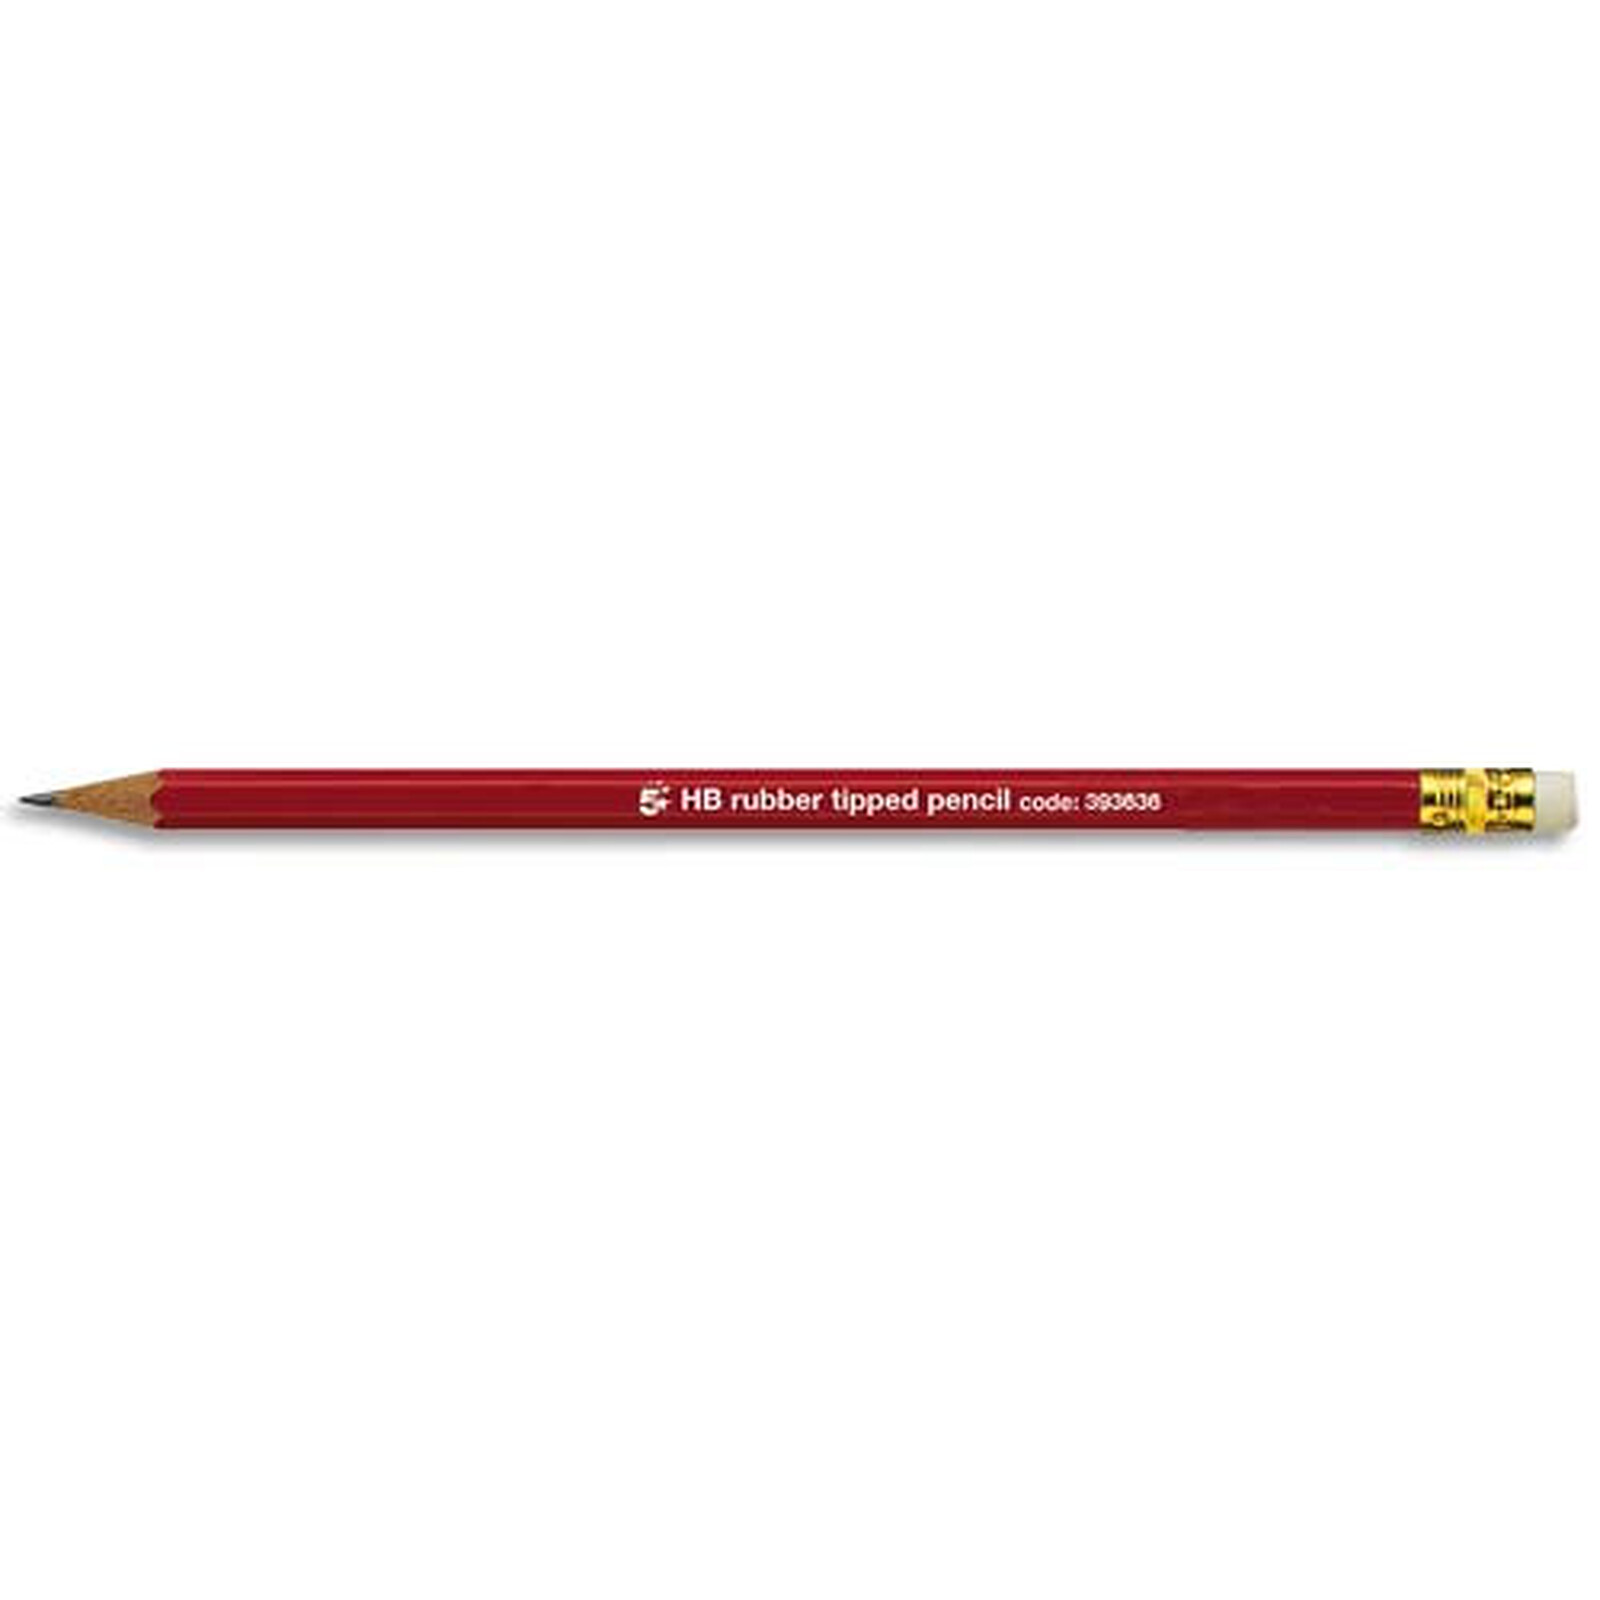 Crayon graphite HB embout gomme, Pas Cher